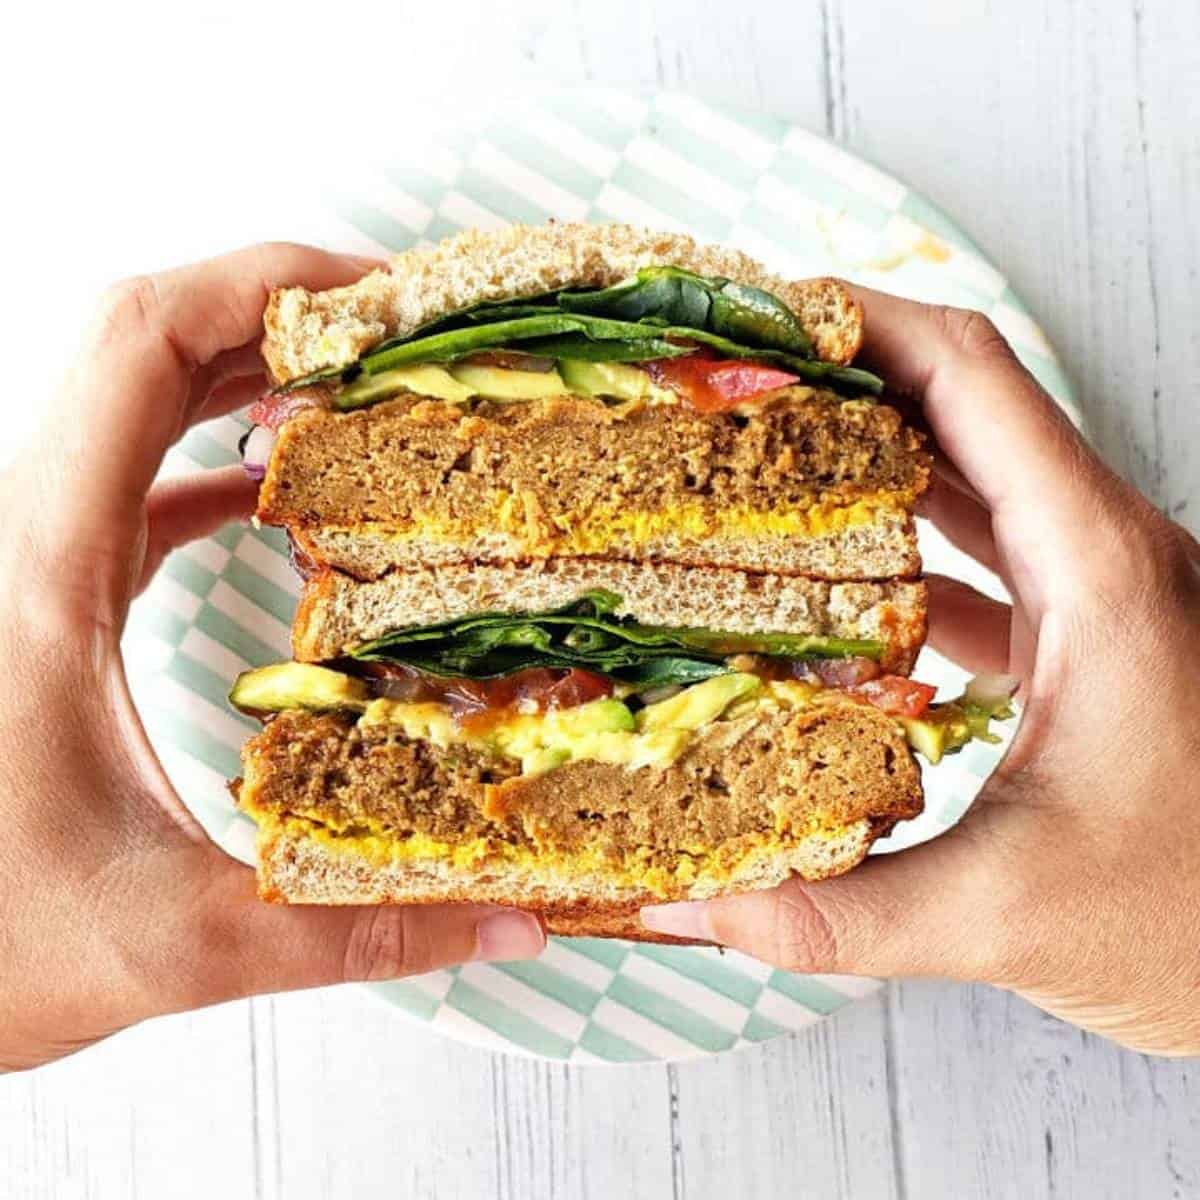 hands holding a sandwich filled with seitan and veggies.